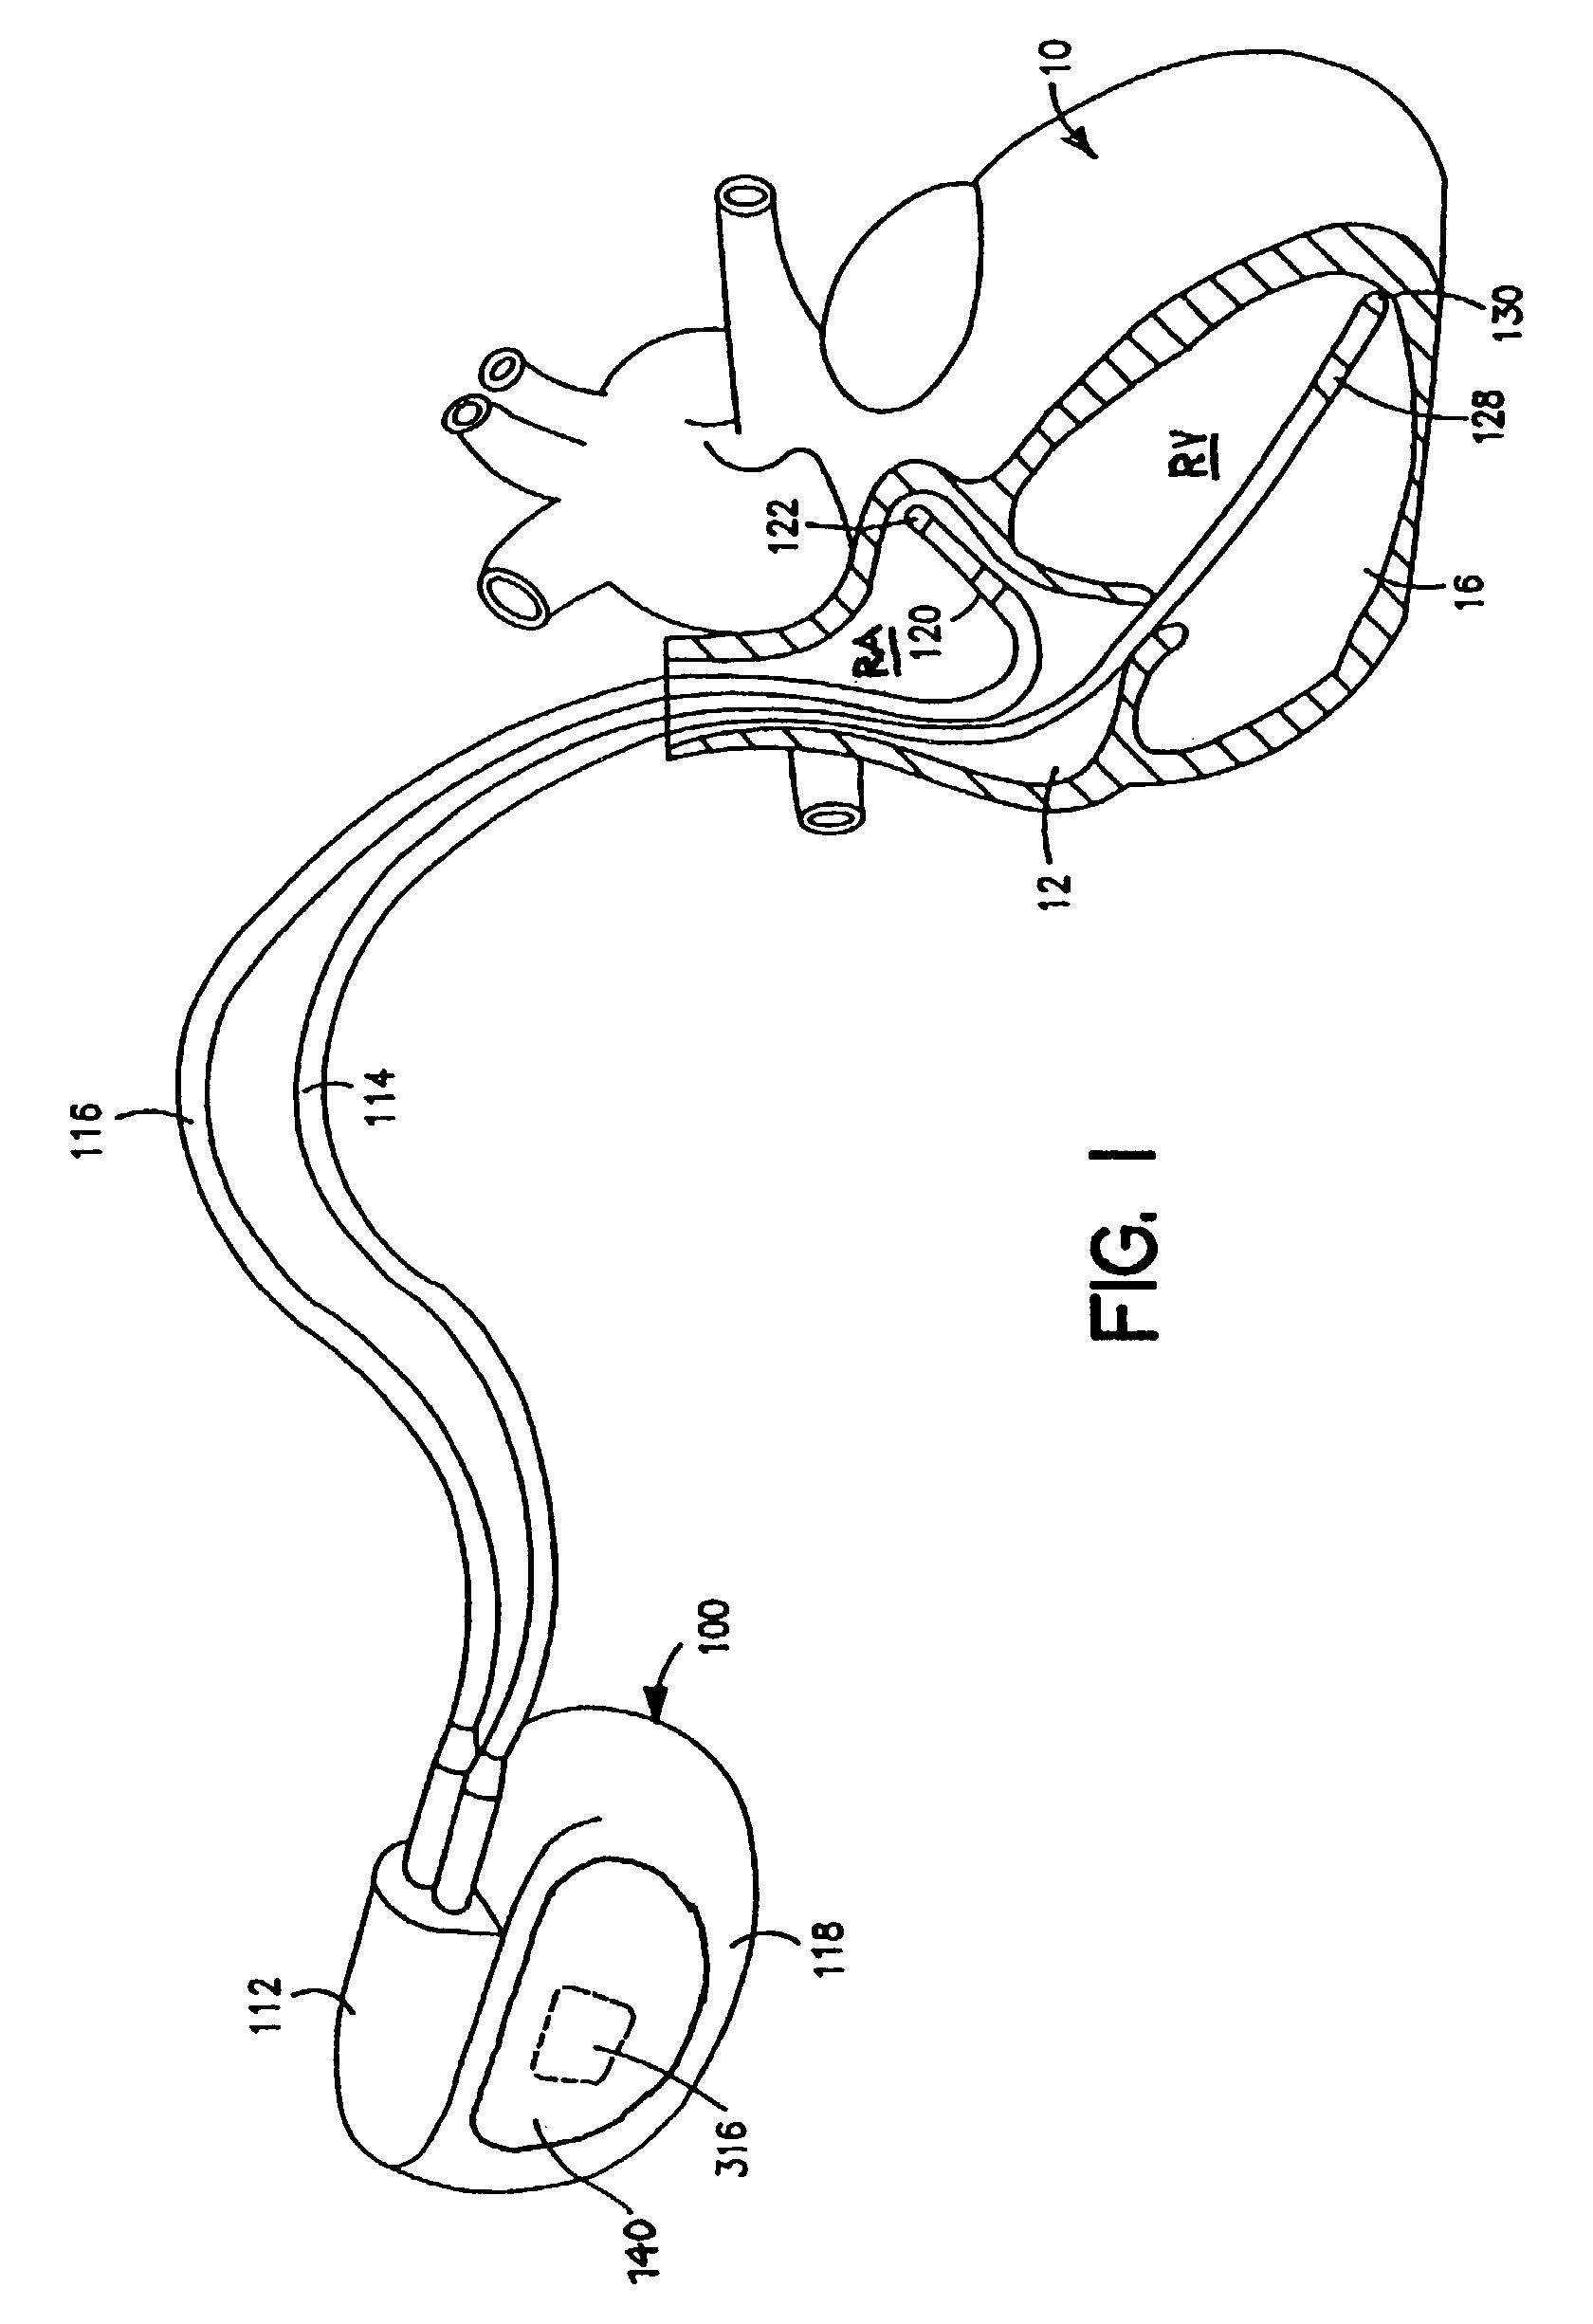 Methods and apparatus for detecting ventricular depolarizations during atrial pacing